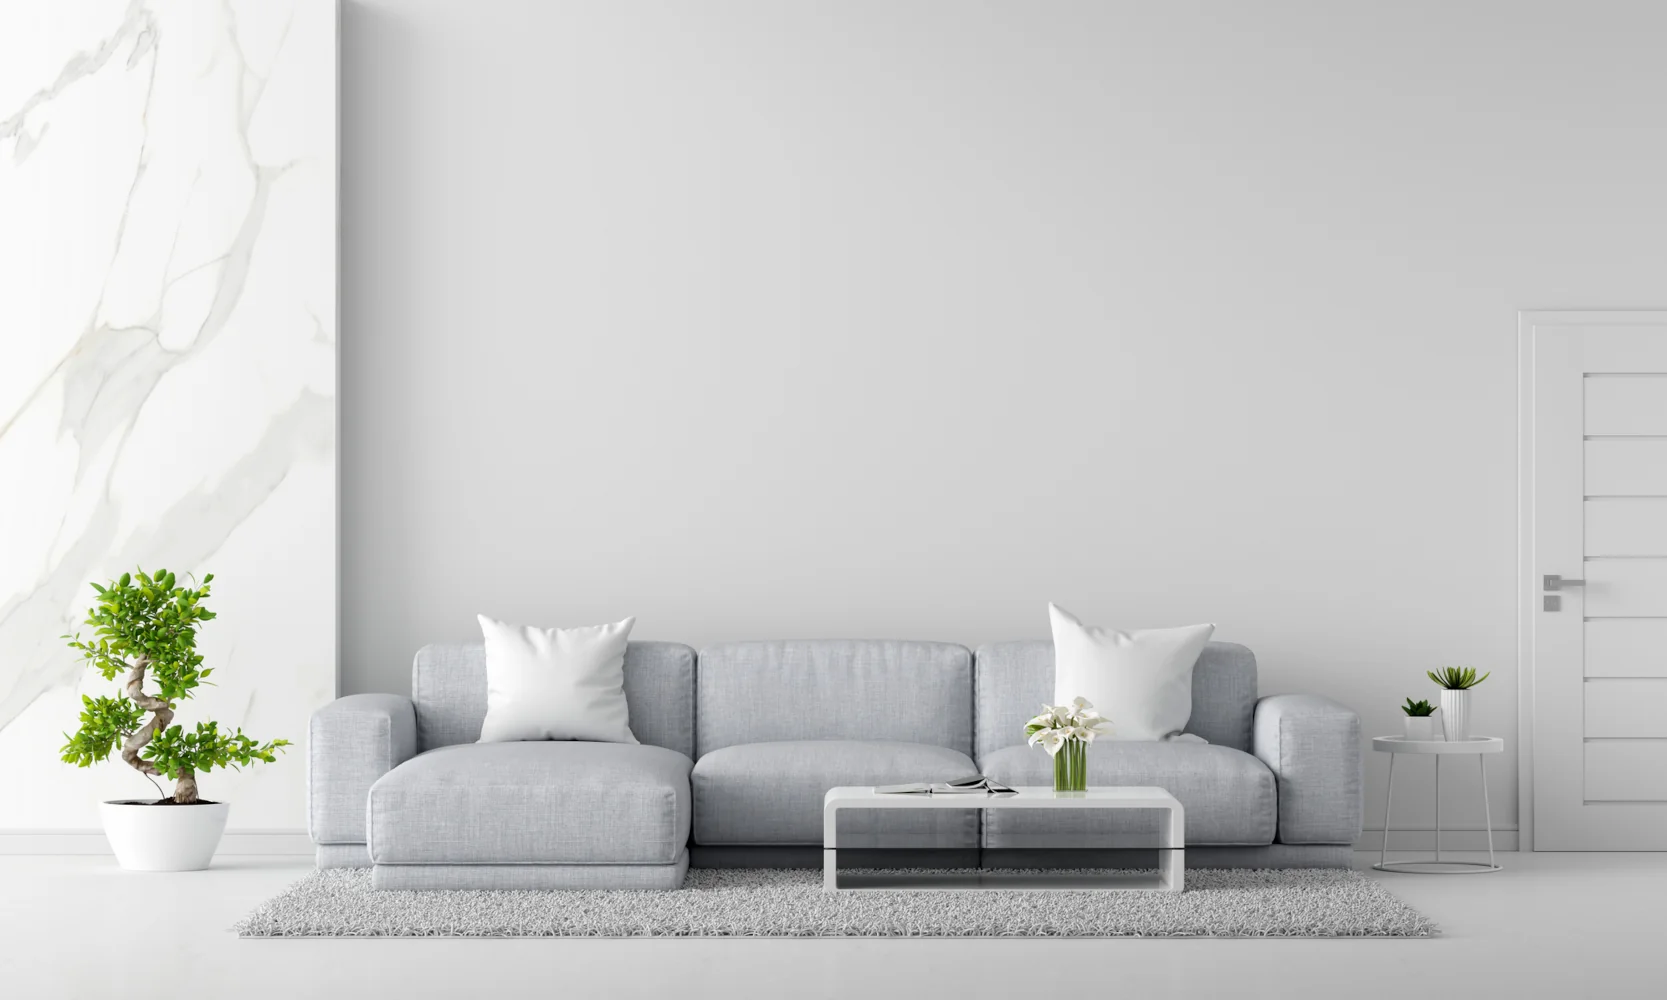 gray sofa white living room interior with copy spac e 3d rendering